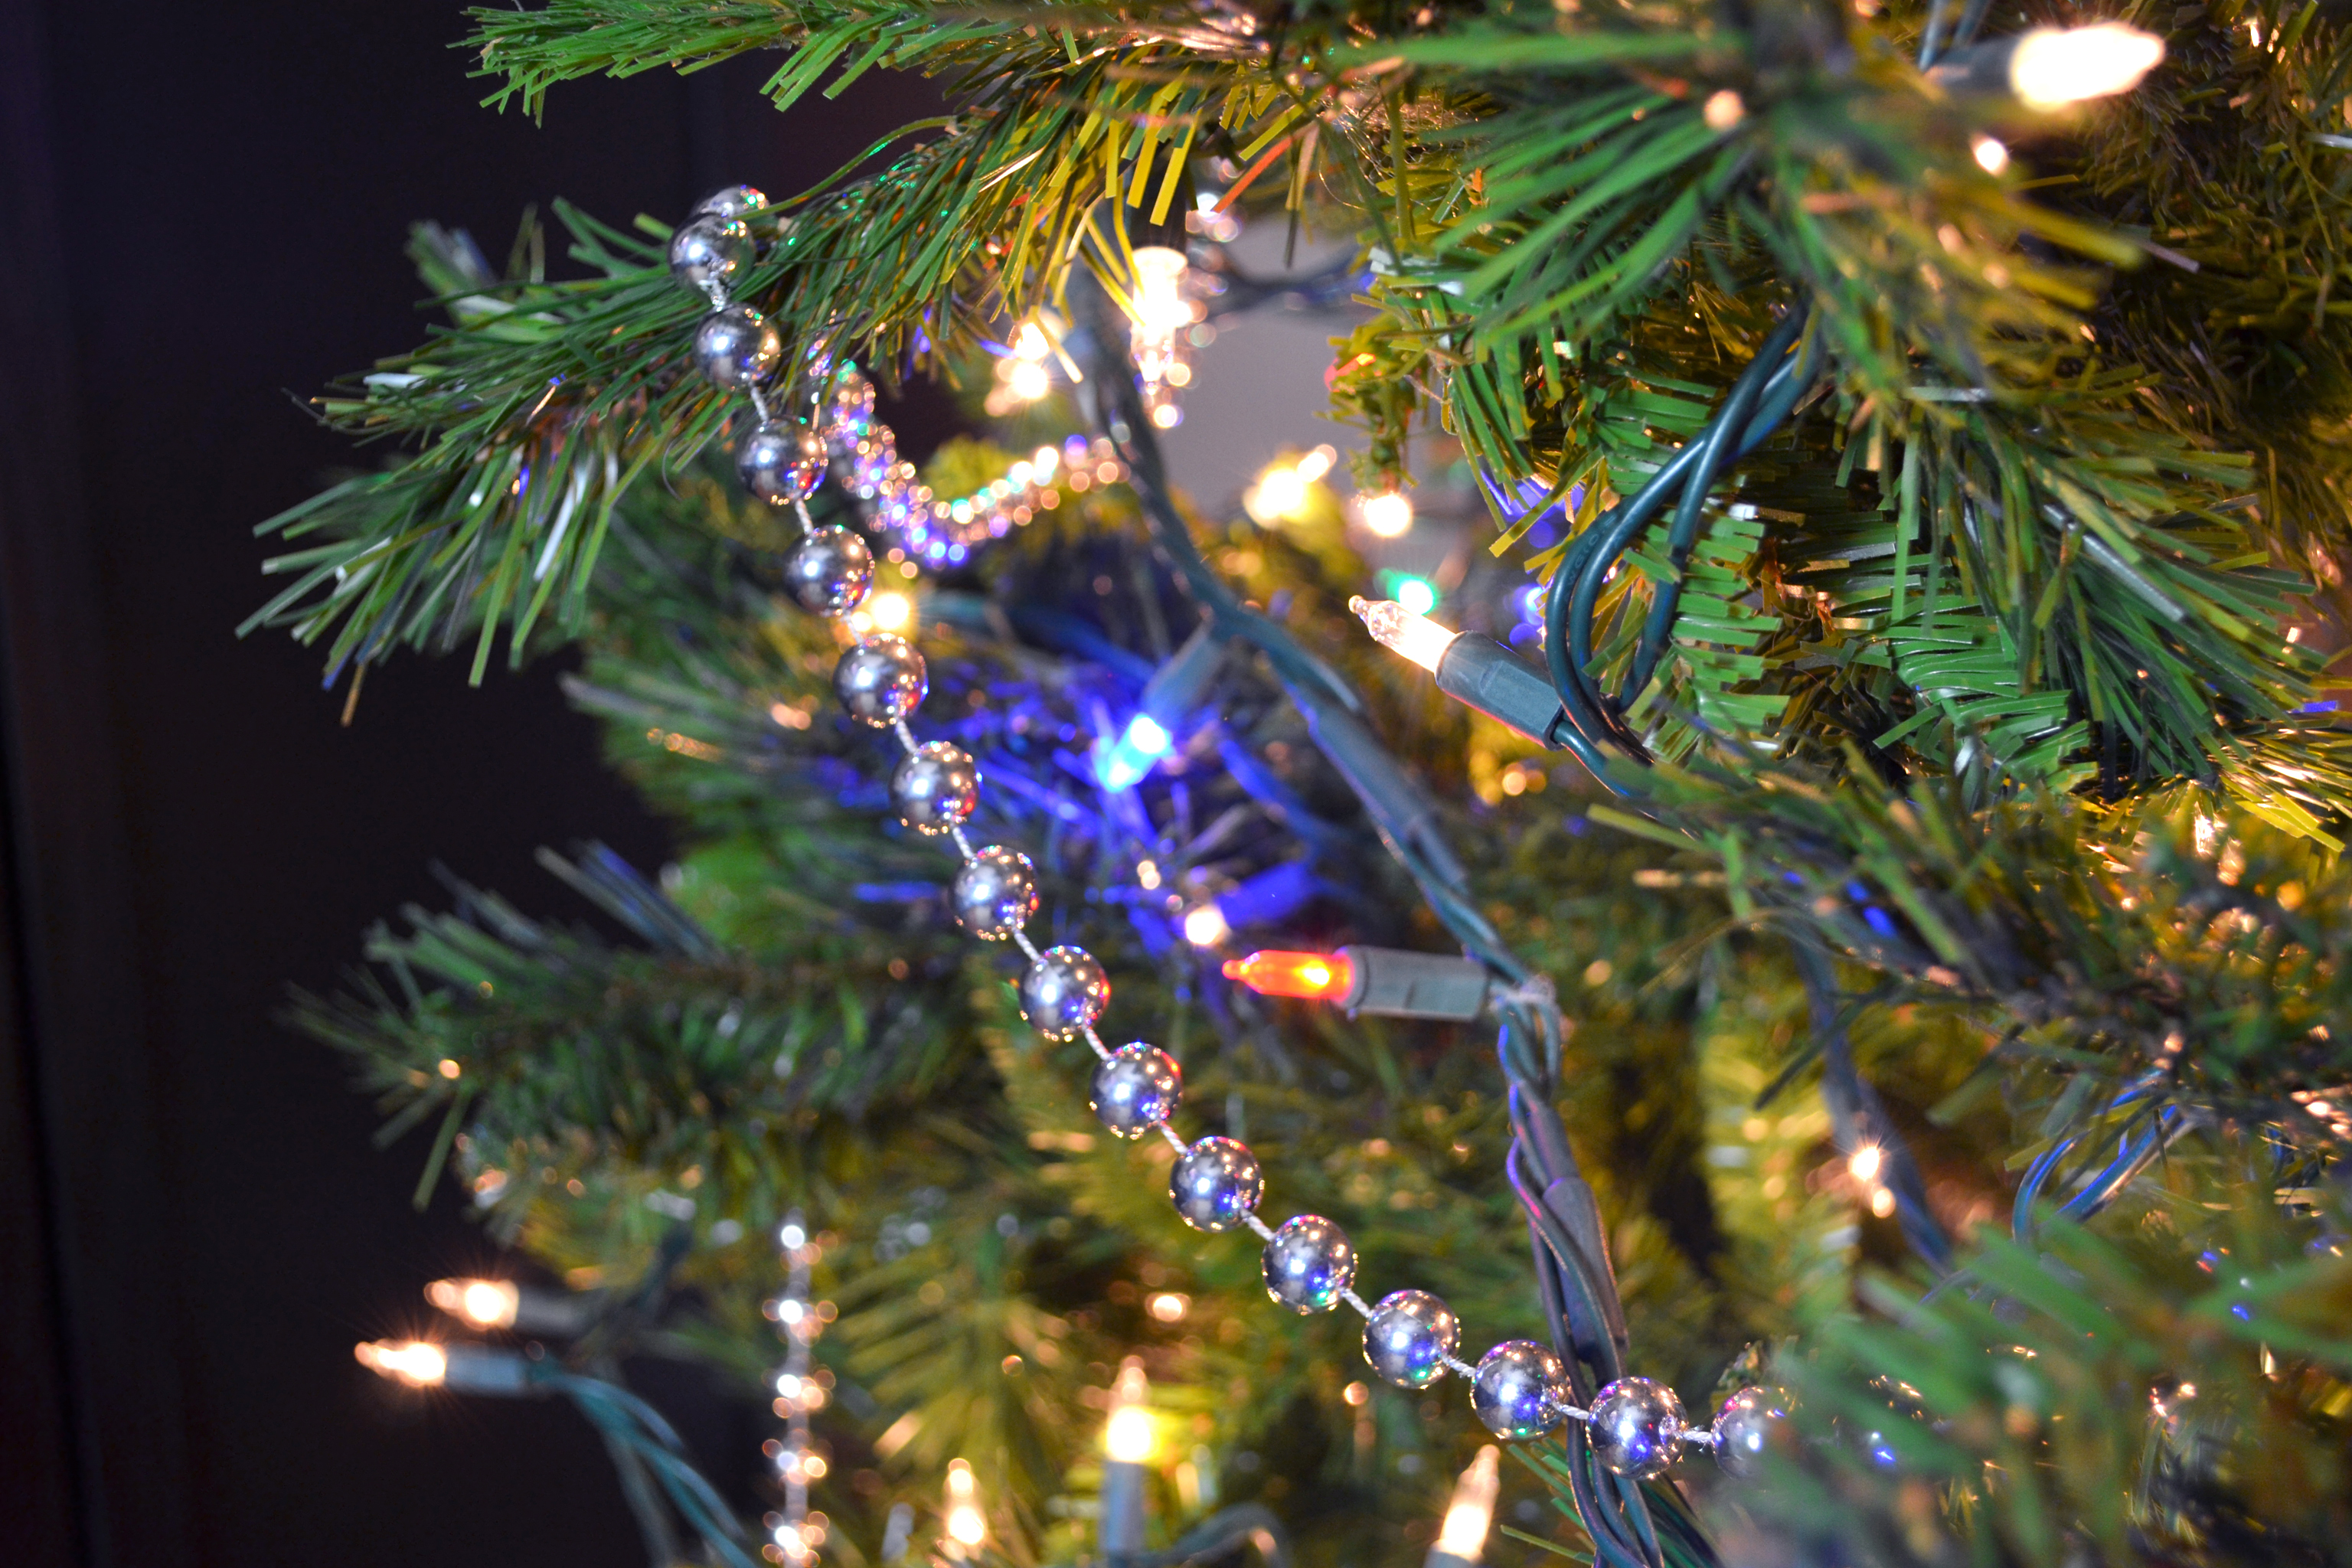 Make pretty beaded Christmas trees with 3 items